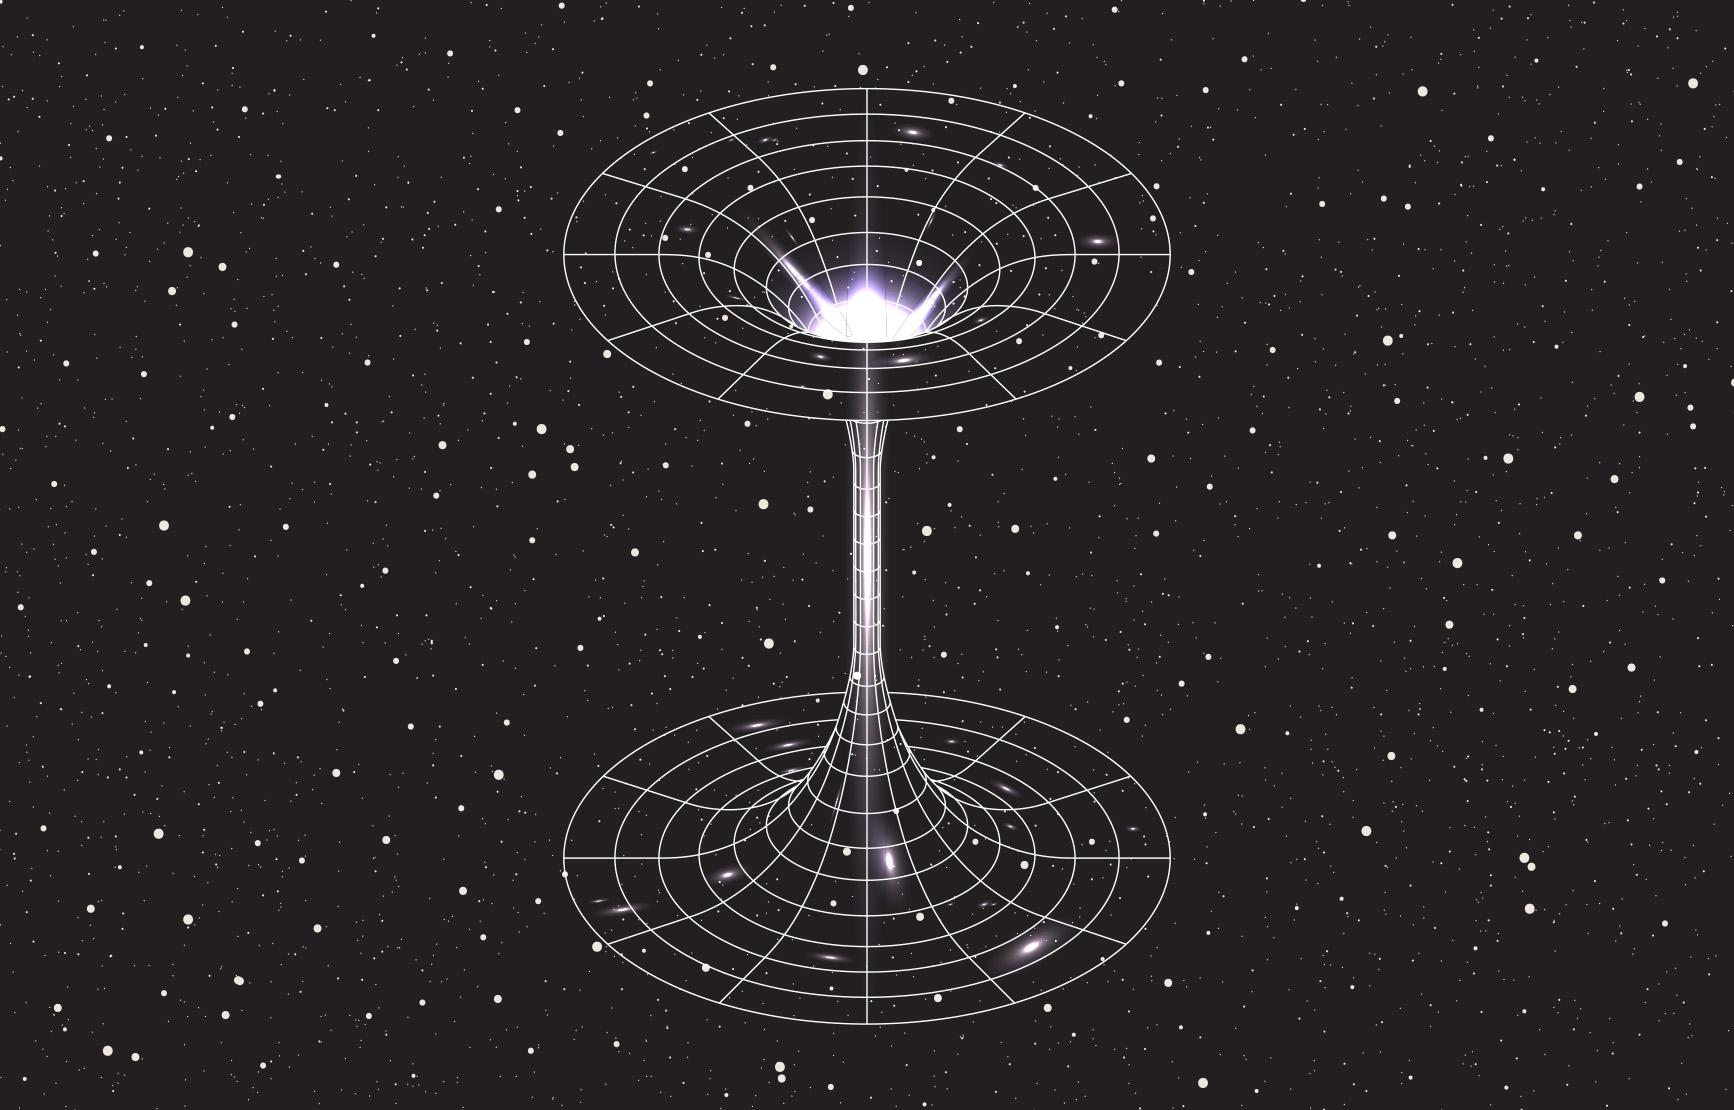 Illustration of a wormhole